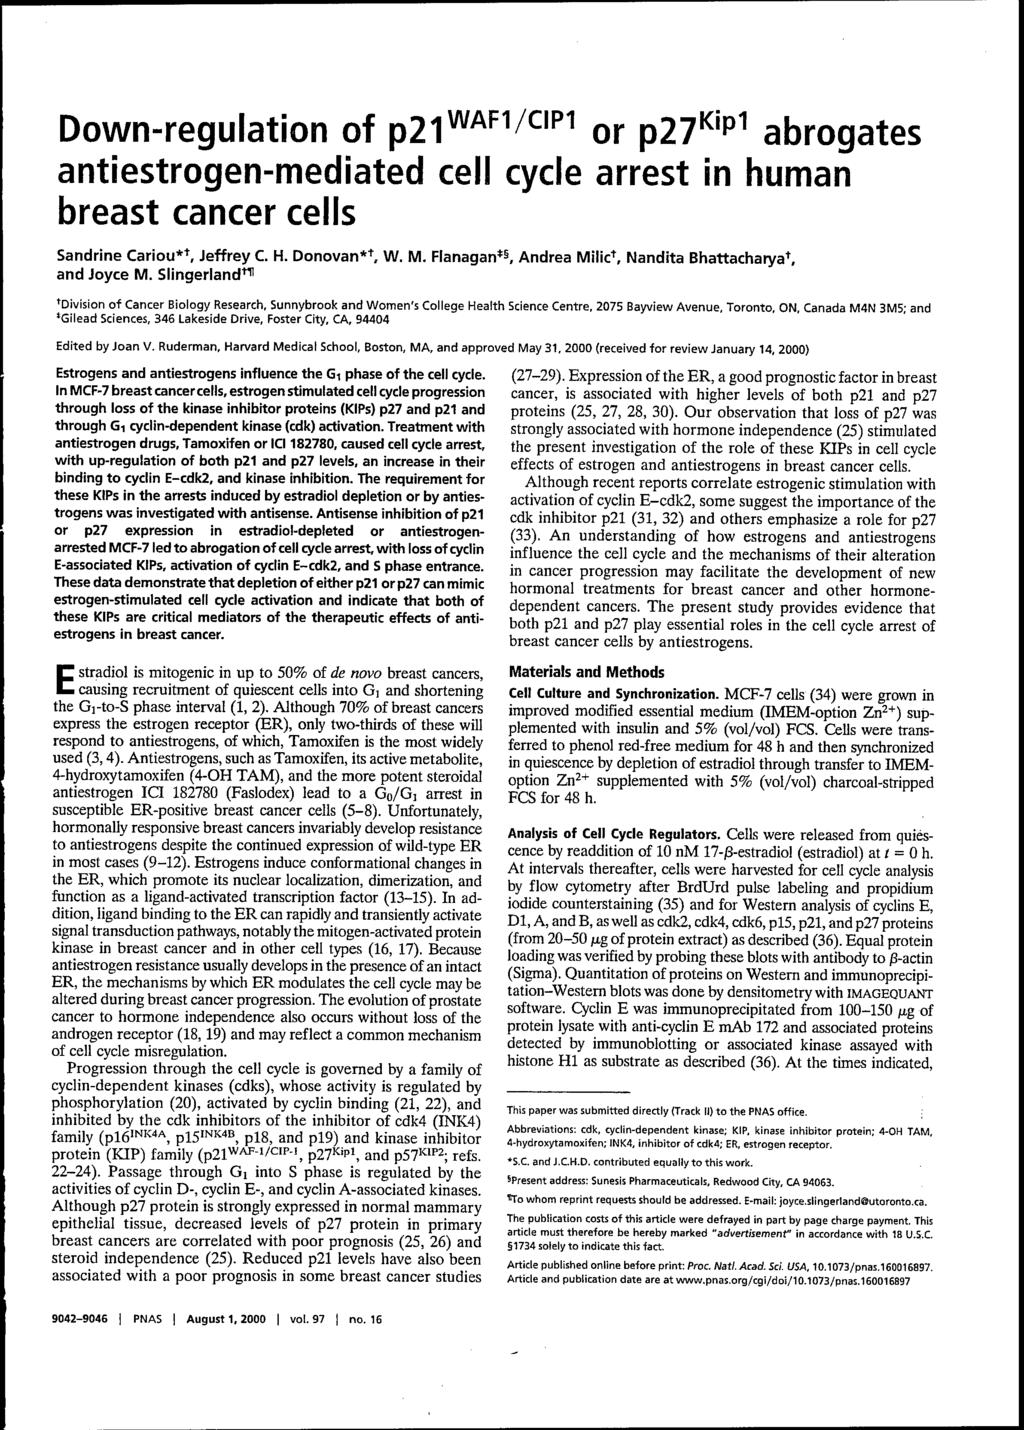 Down-regulation of P 21 WAF1 /CIPI or p2 7Kipi abrogates antiestrogen-mediated cell cycle arrest in human breast cancer cells Sandrine Cariou**, Jeffrey C. H. Donovan**, W. M.